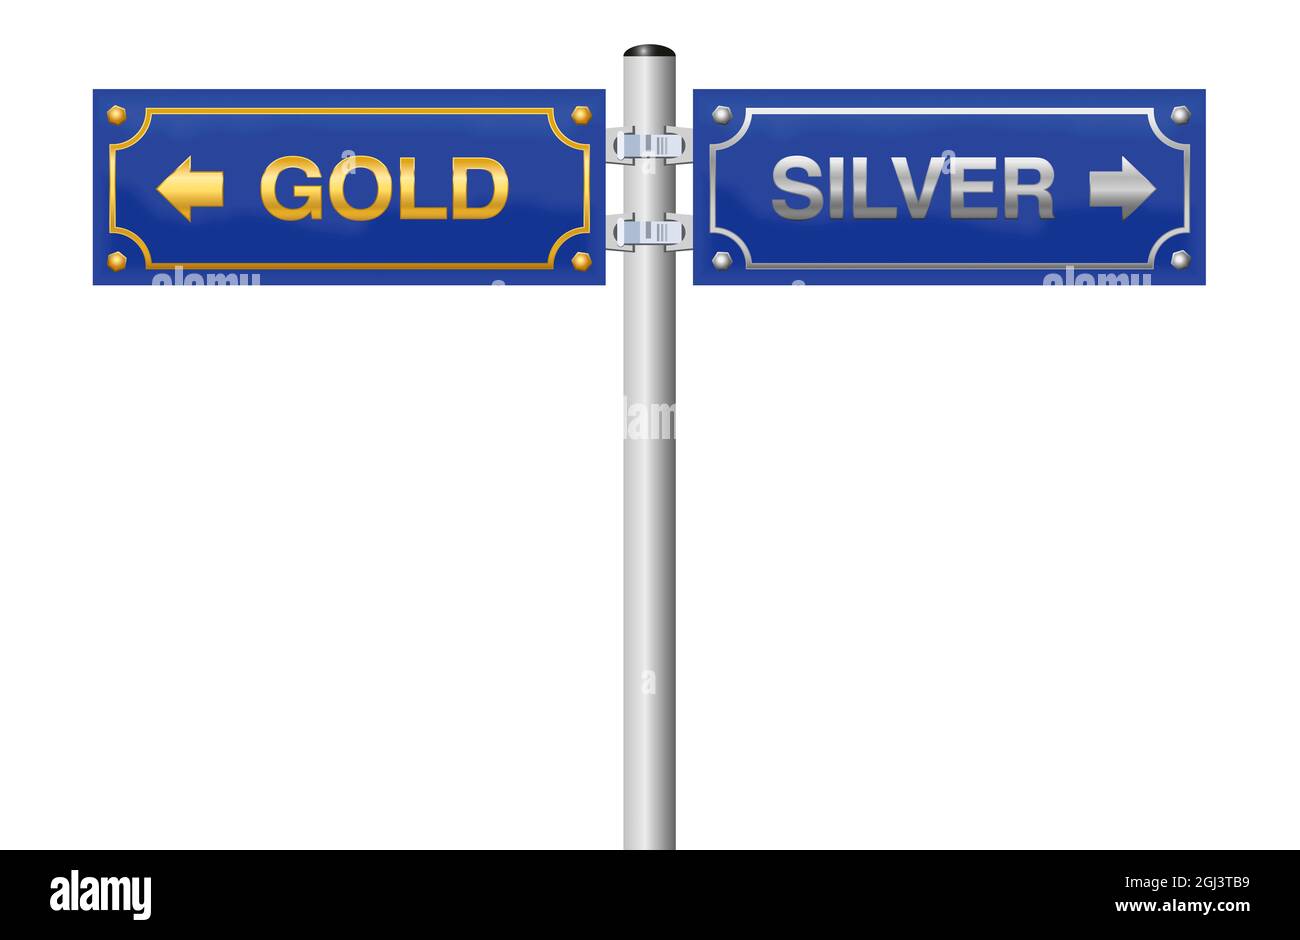 GOLD SILVER street sign, blue signpost - symbolic for decision to buy, sell or invest in gold or silver - illustration on white background. Stock Photo